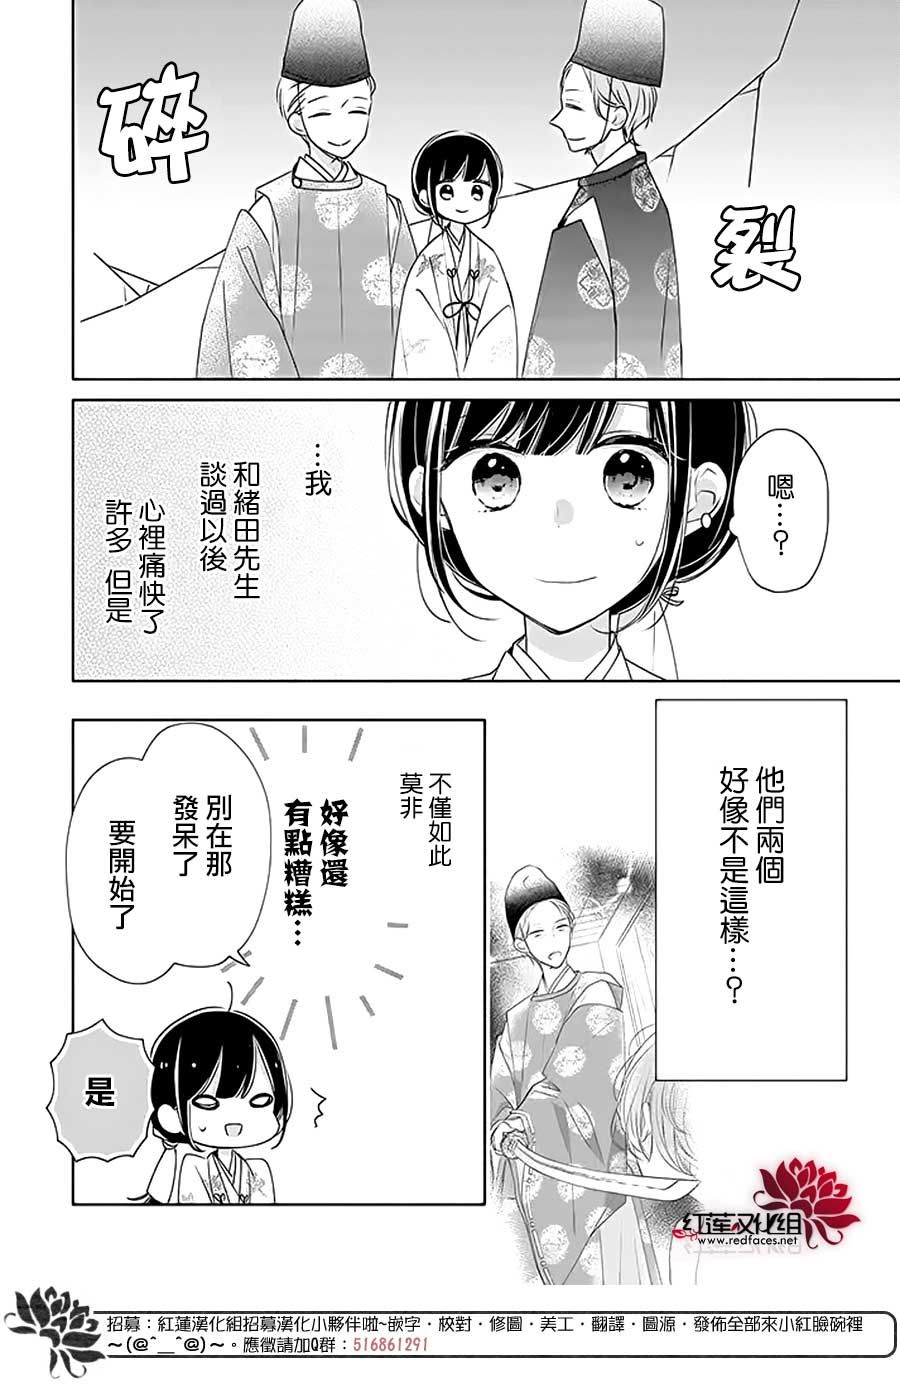 《If given a second chance》漫画 second chance 028集